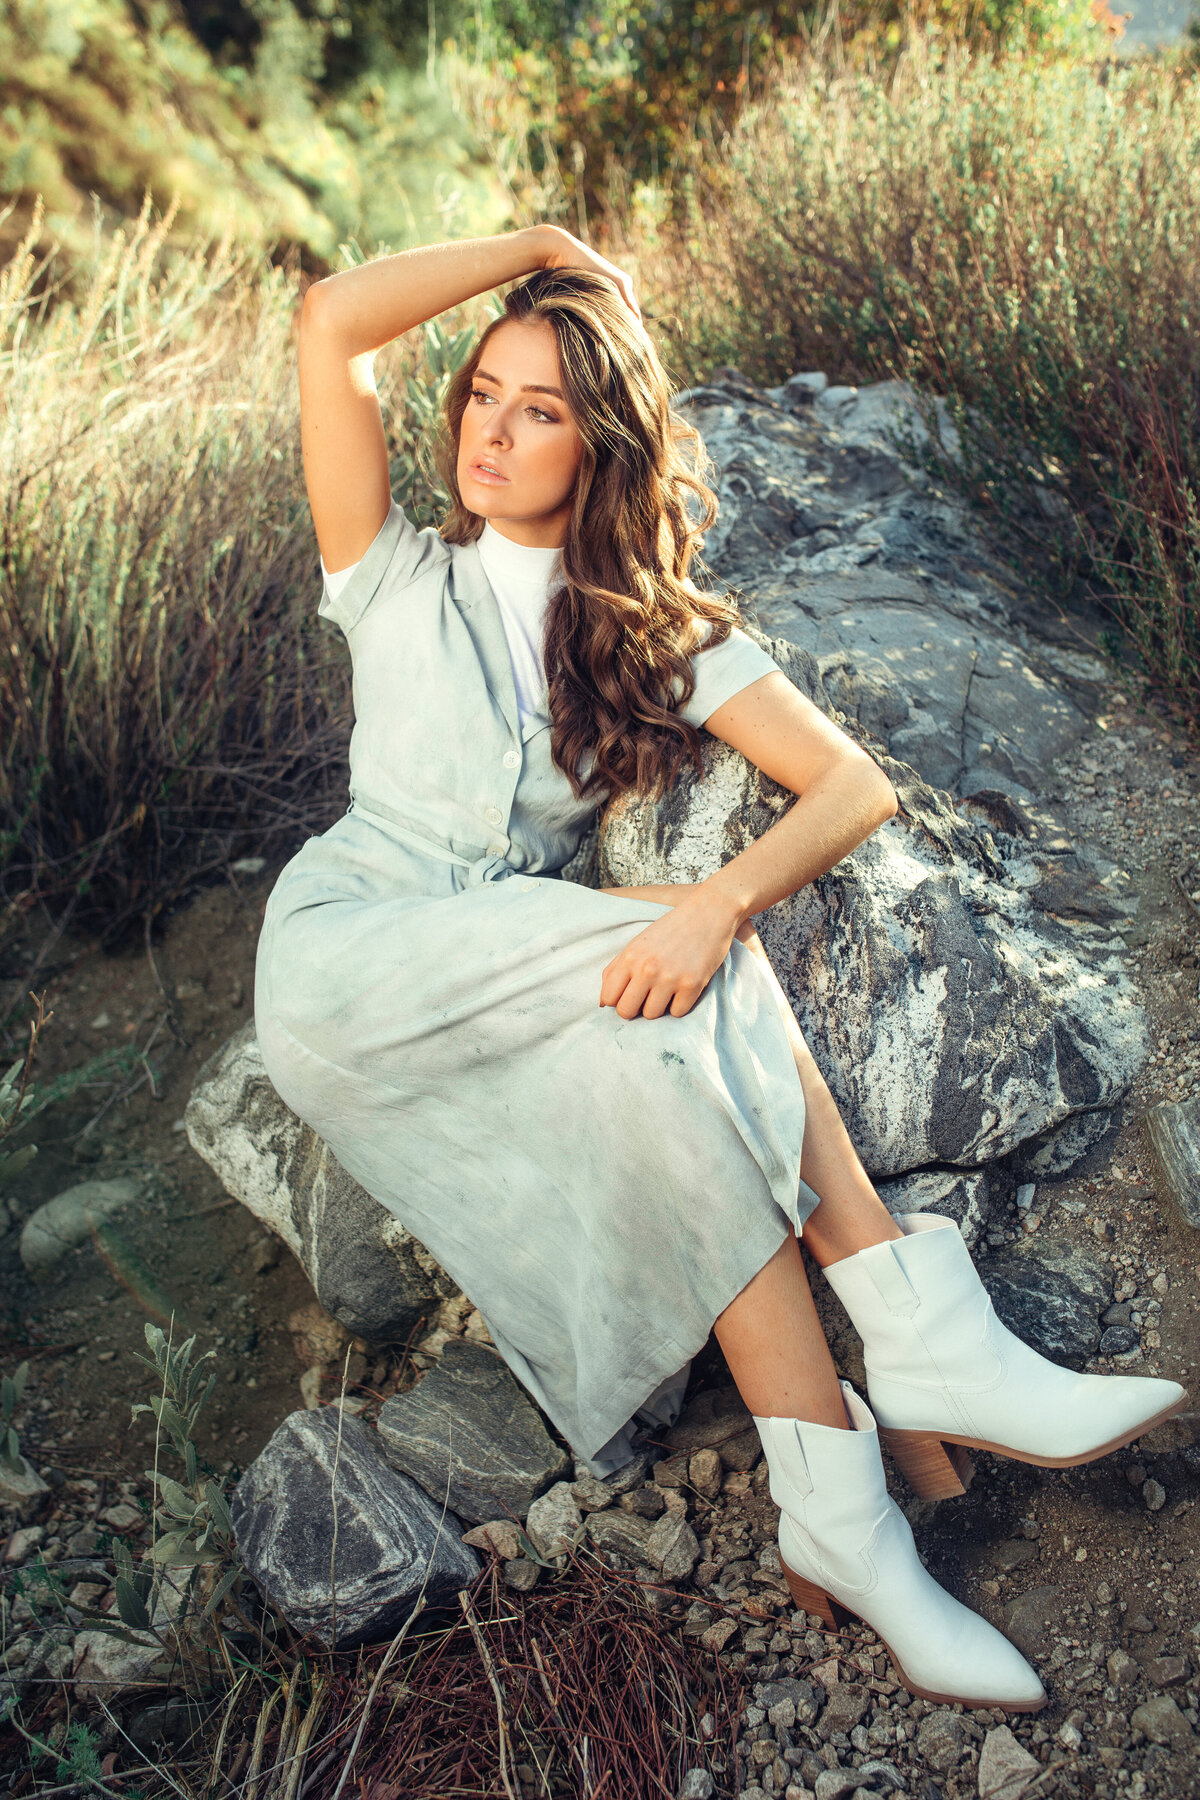 Portrait Photo Of Young Woman In White Dress Sitting On a Rock Los Angeles